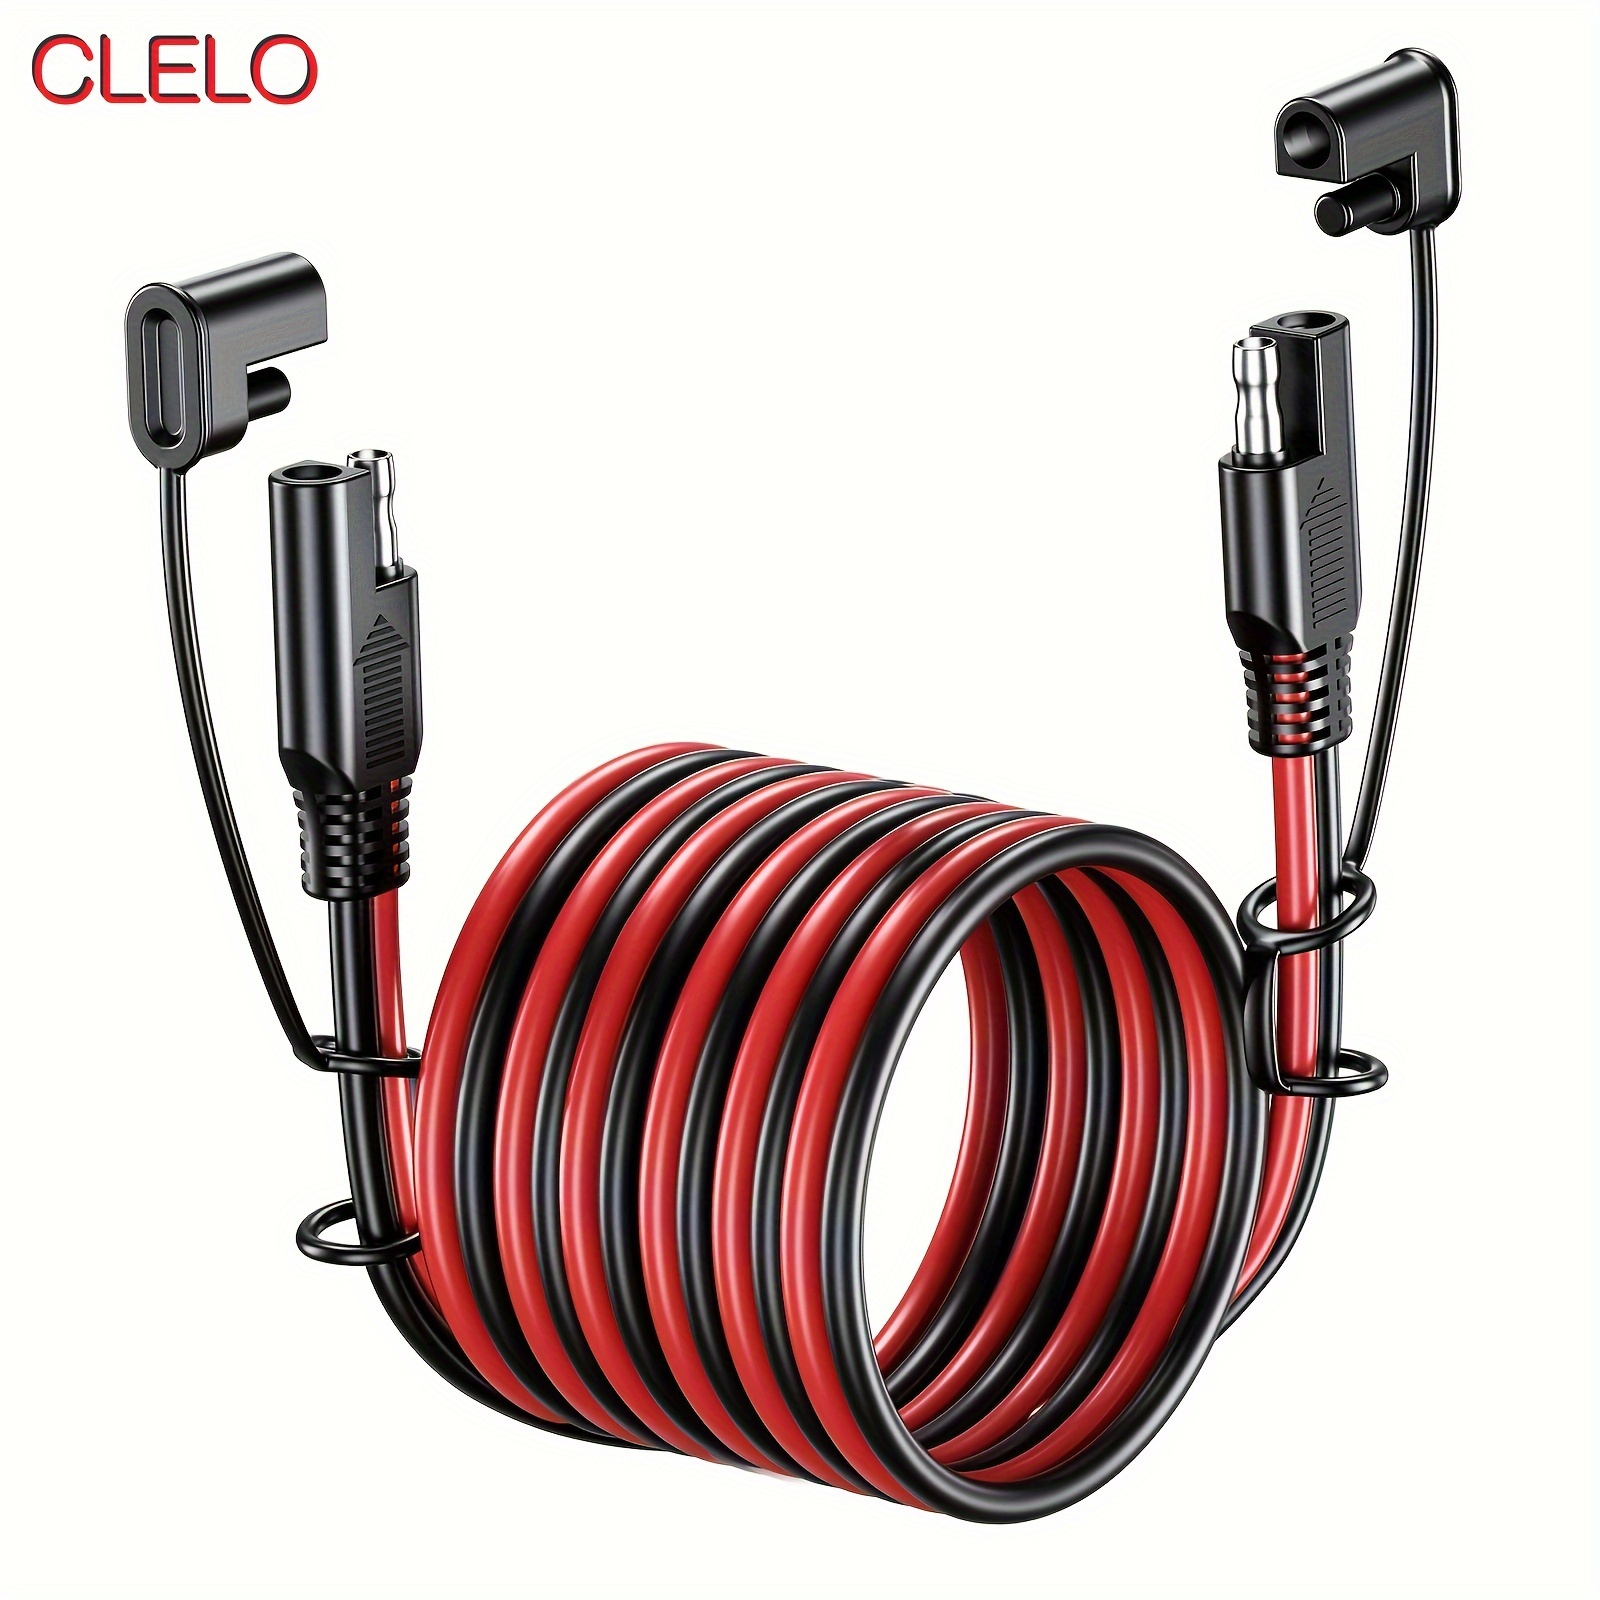 

6ft/25ft Sae To Sae Extension Cable 2 Pin Quick Disconnect 14awg Heavy Duty Sae Connector Bullet Lead Cable Automotive Solar Panel Panel Sae Plug